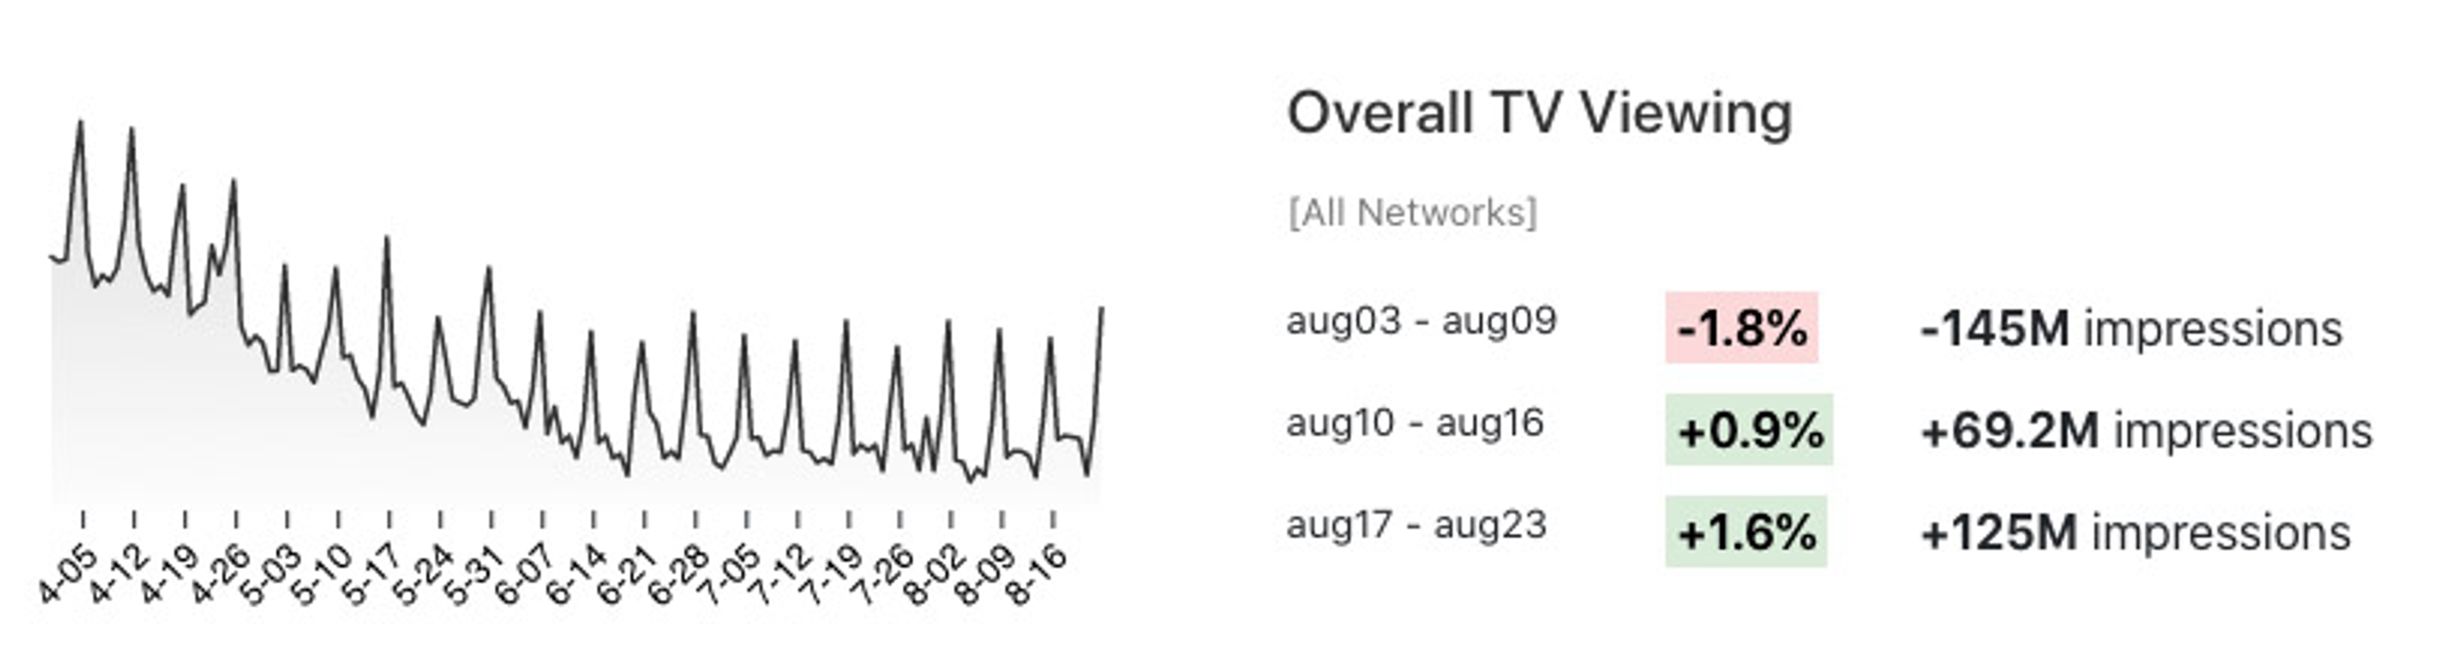 Overall TV viewing changes line chart.